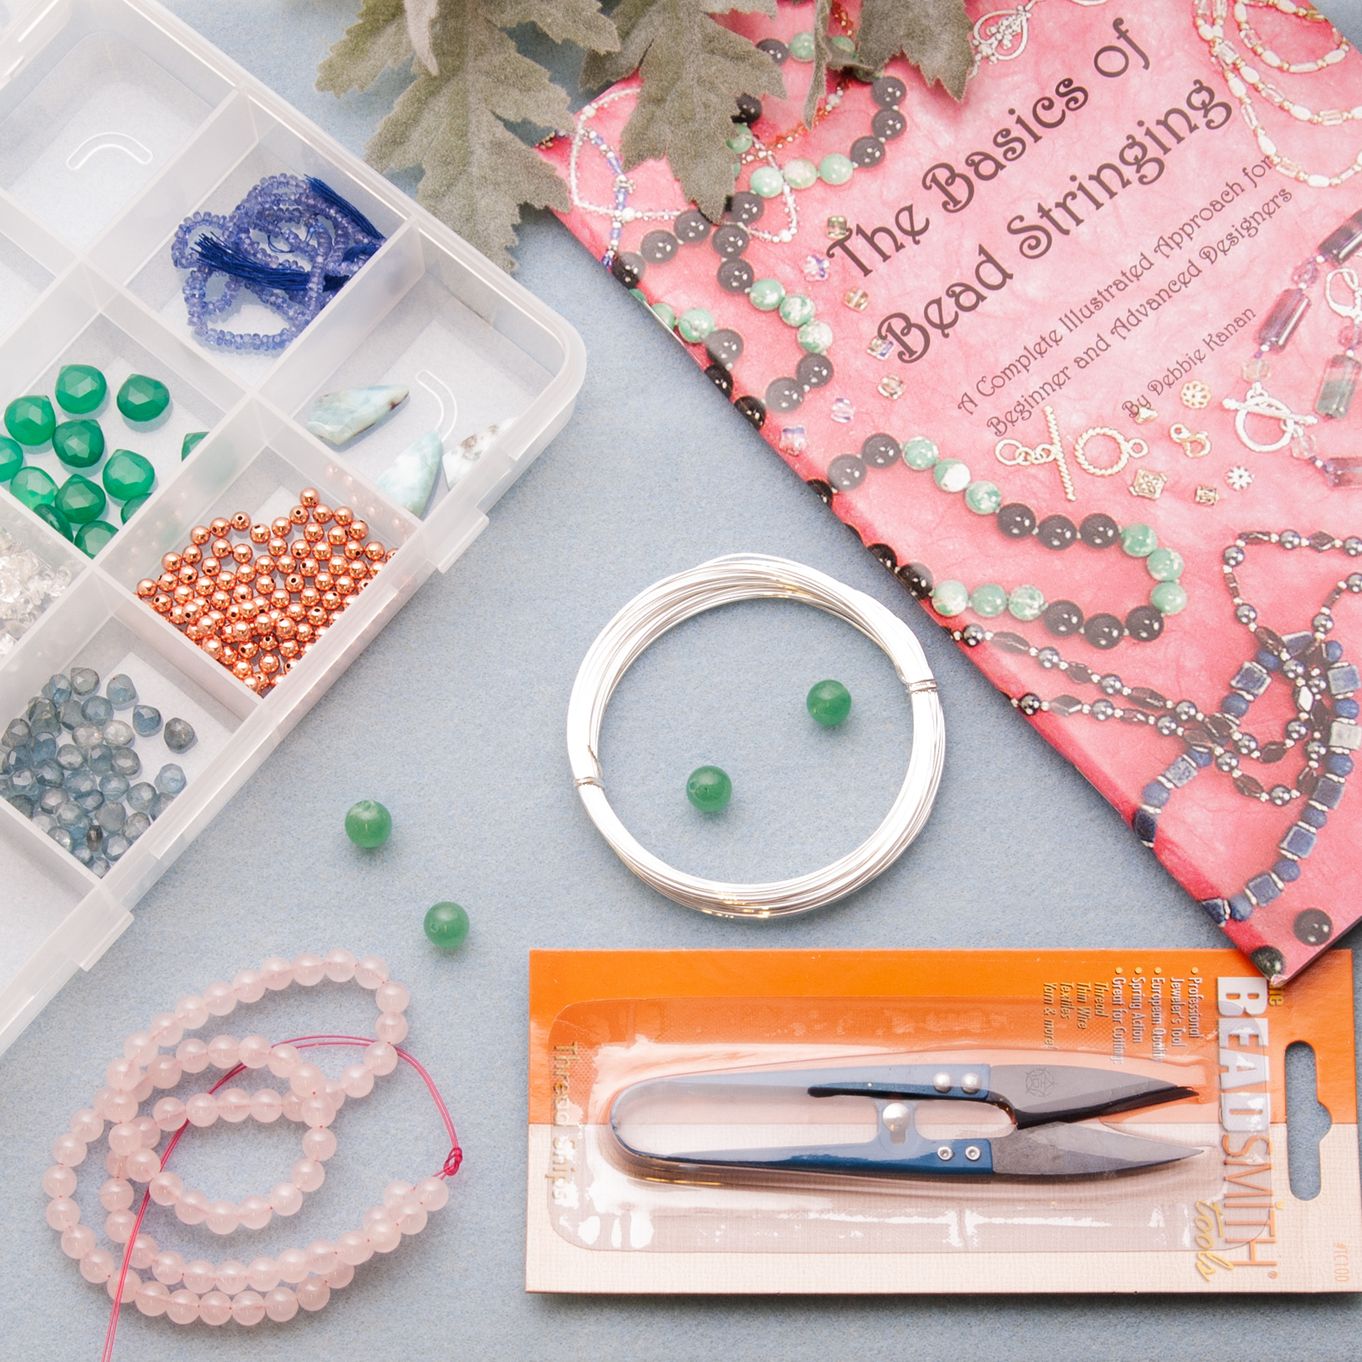 The Illustrated Guide to Jewelry Making Tools